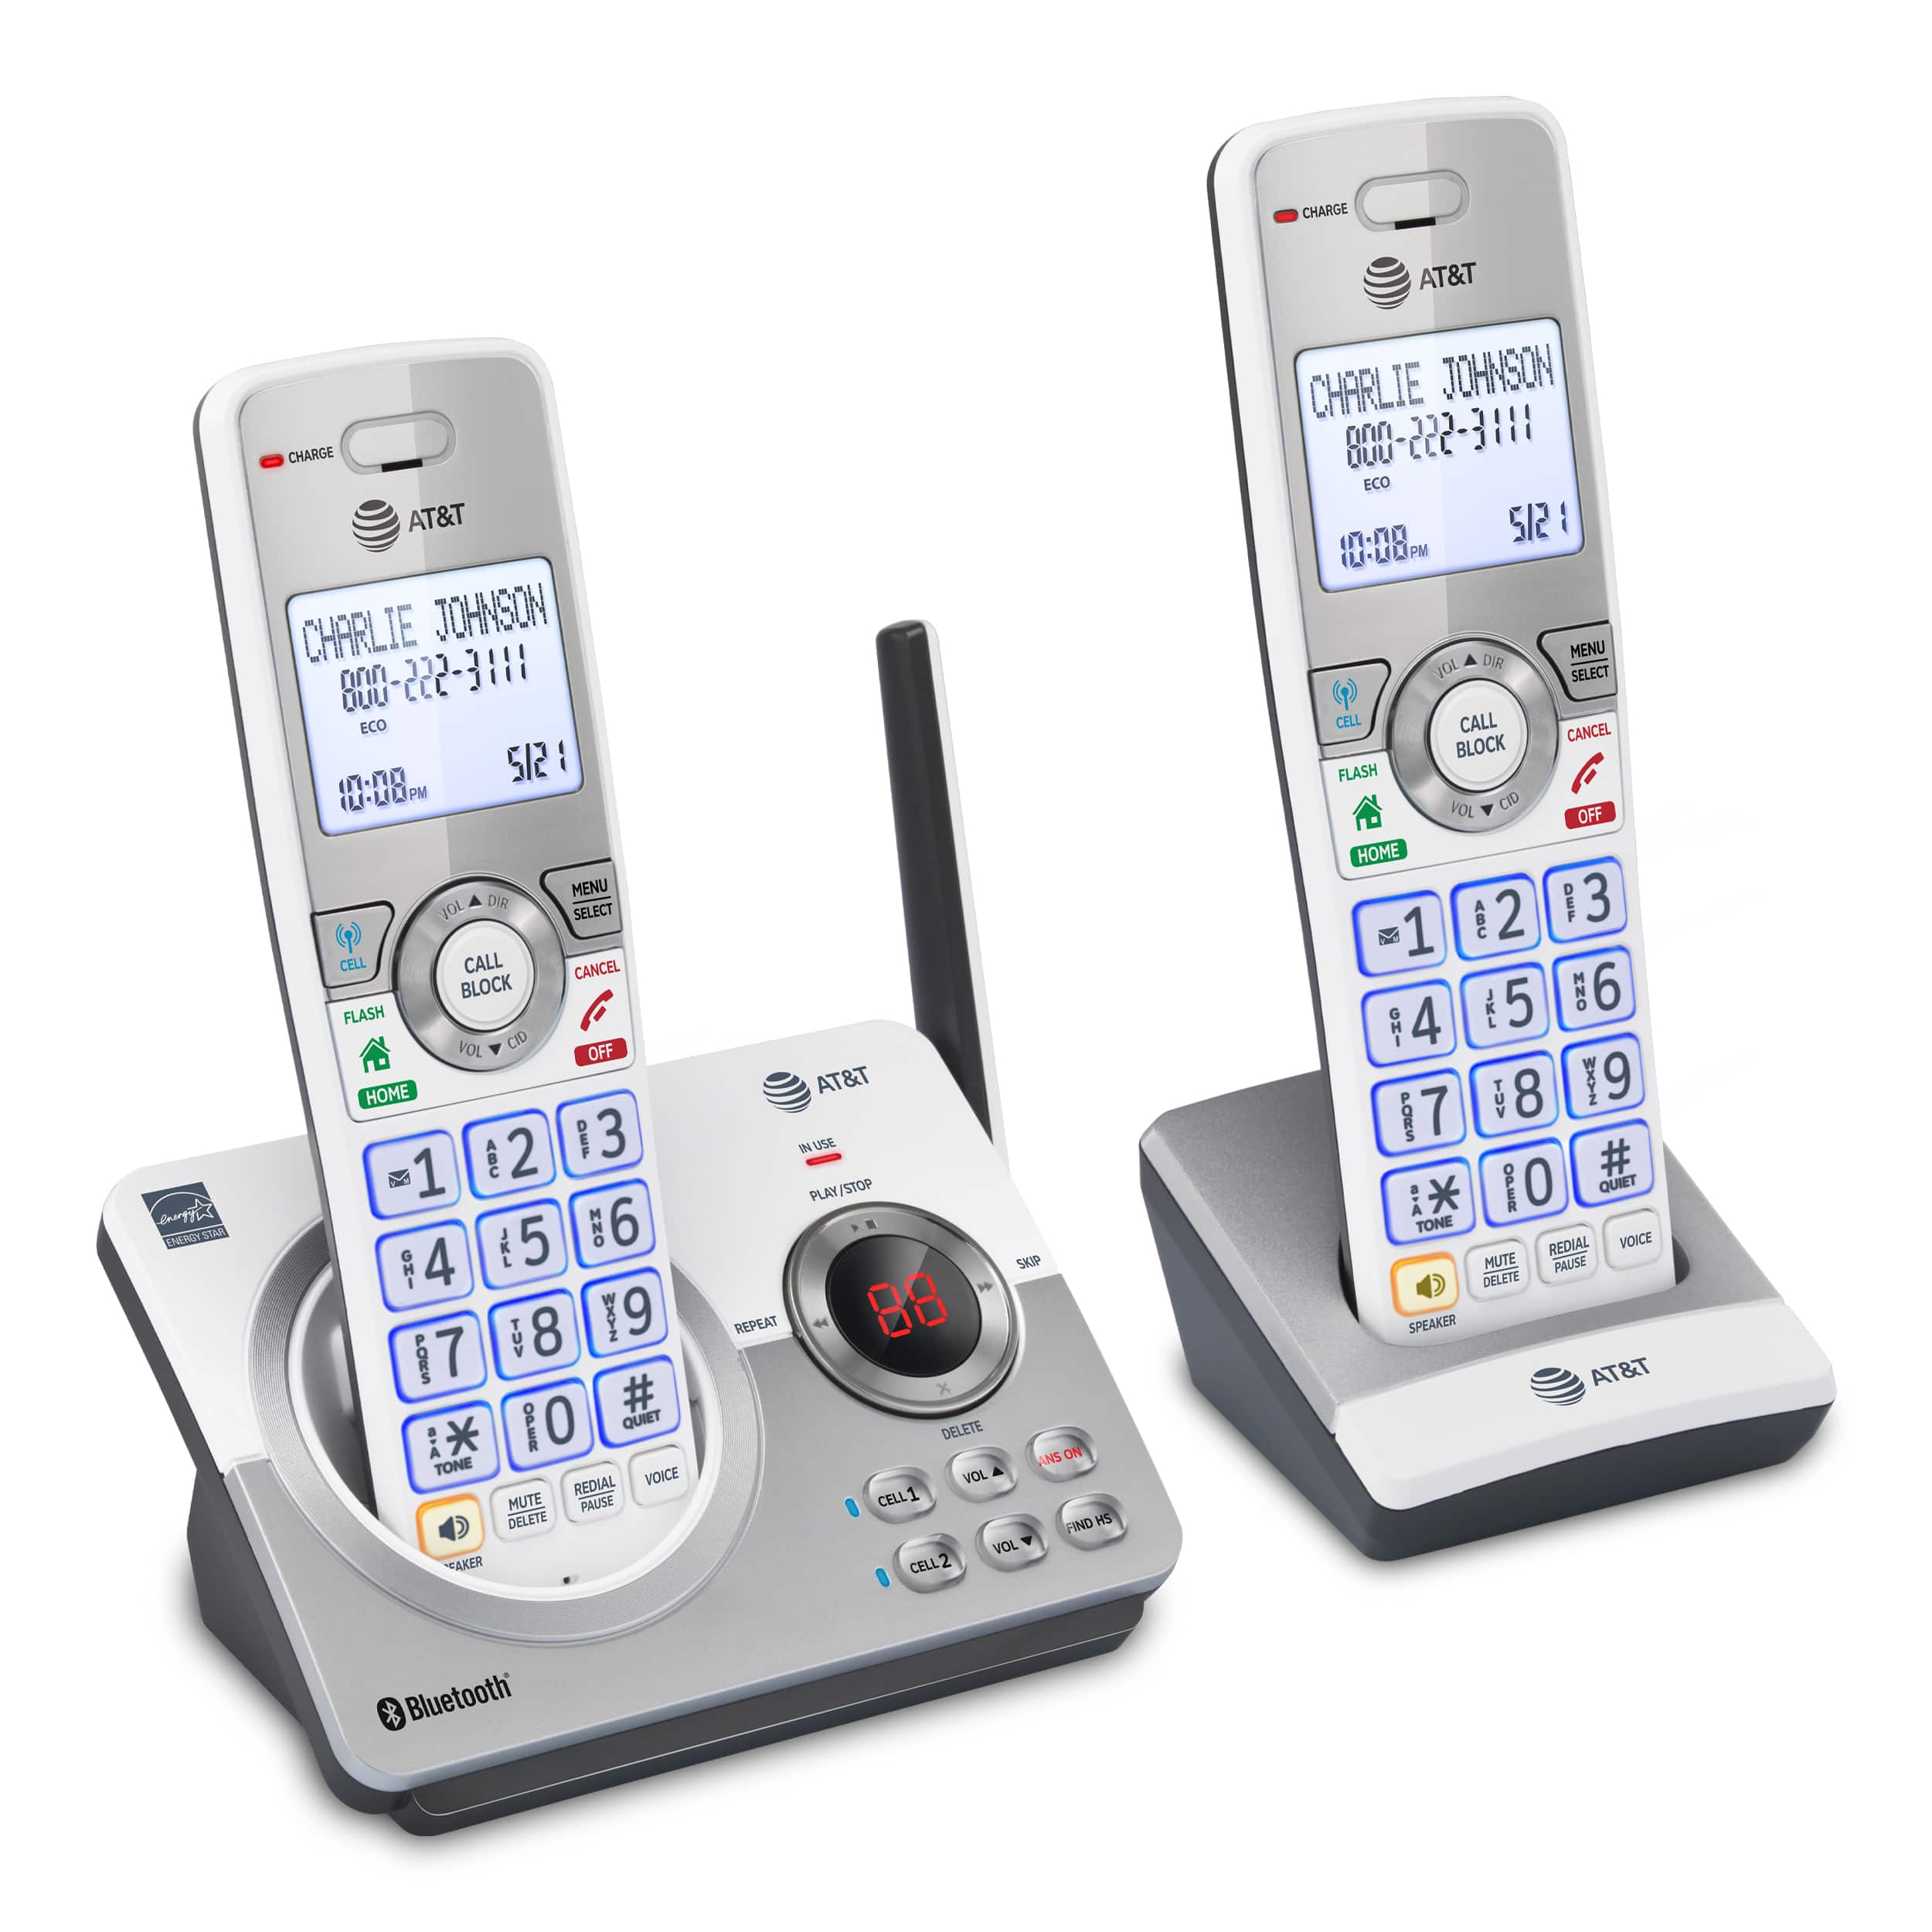 2-Handset Expandable Cordless Phone with Unsurpassed Range, Bluetooth Connect to Cell™, Smart Call Blocker and Answering System - view 3